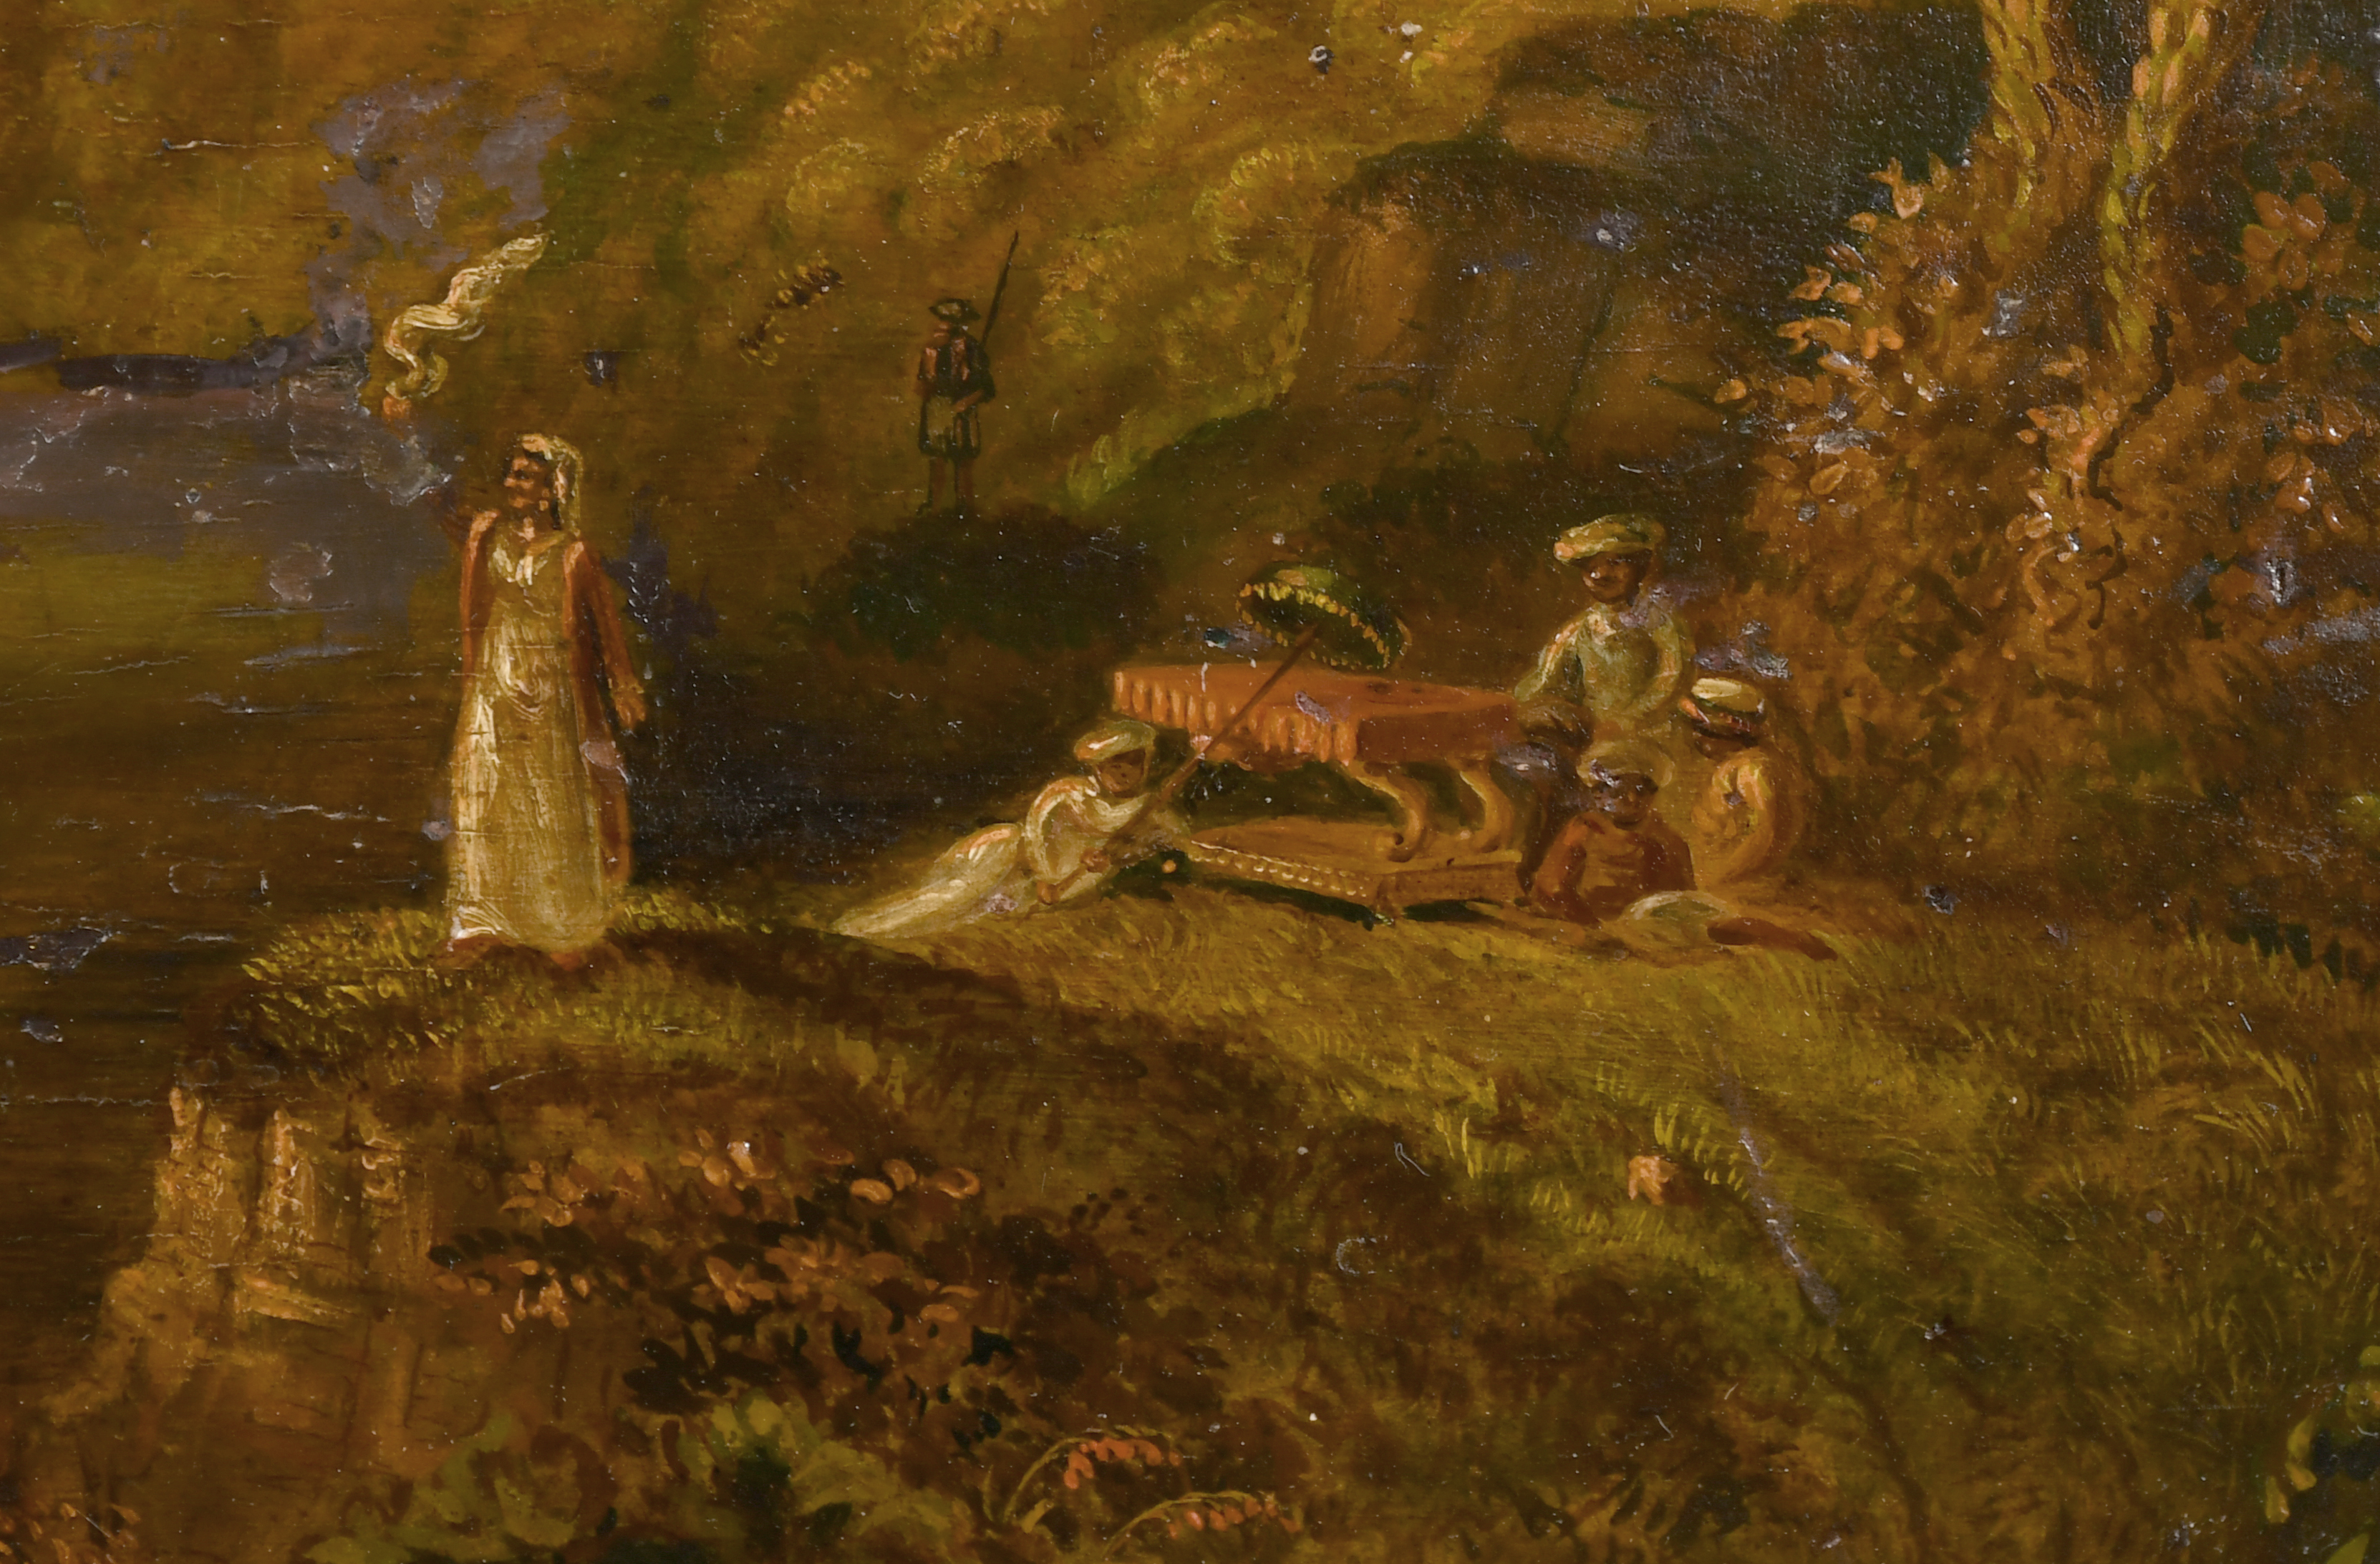 R Howse (19th Century) British. A Woman Signalling in an Indian Landscape, Oil on panel, Signed and - Image 3 of 4